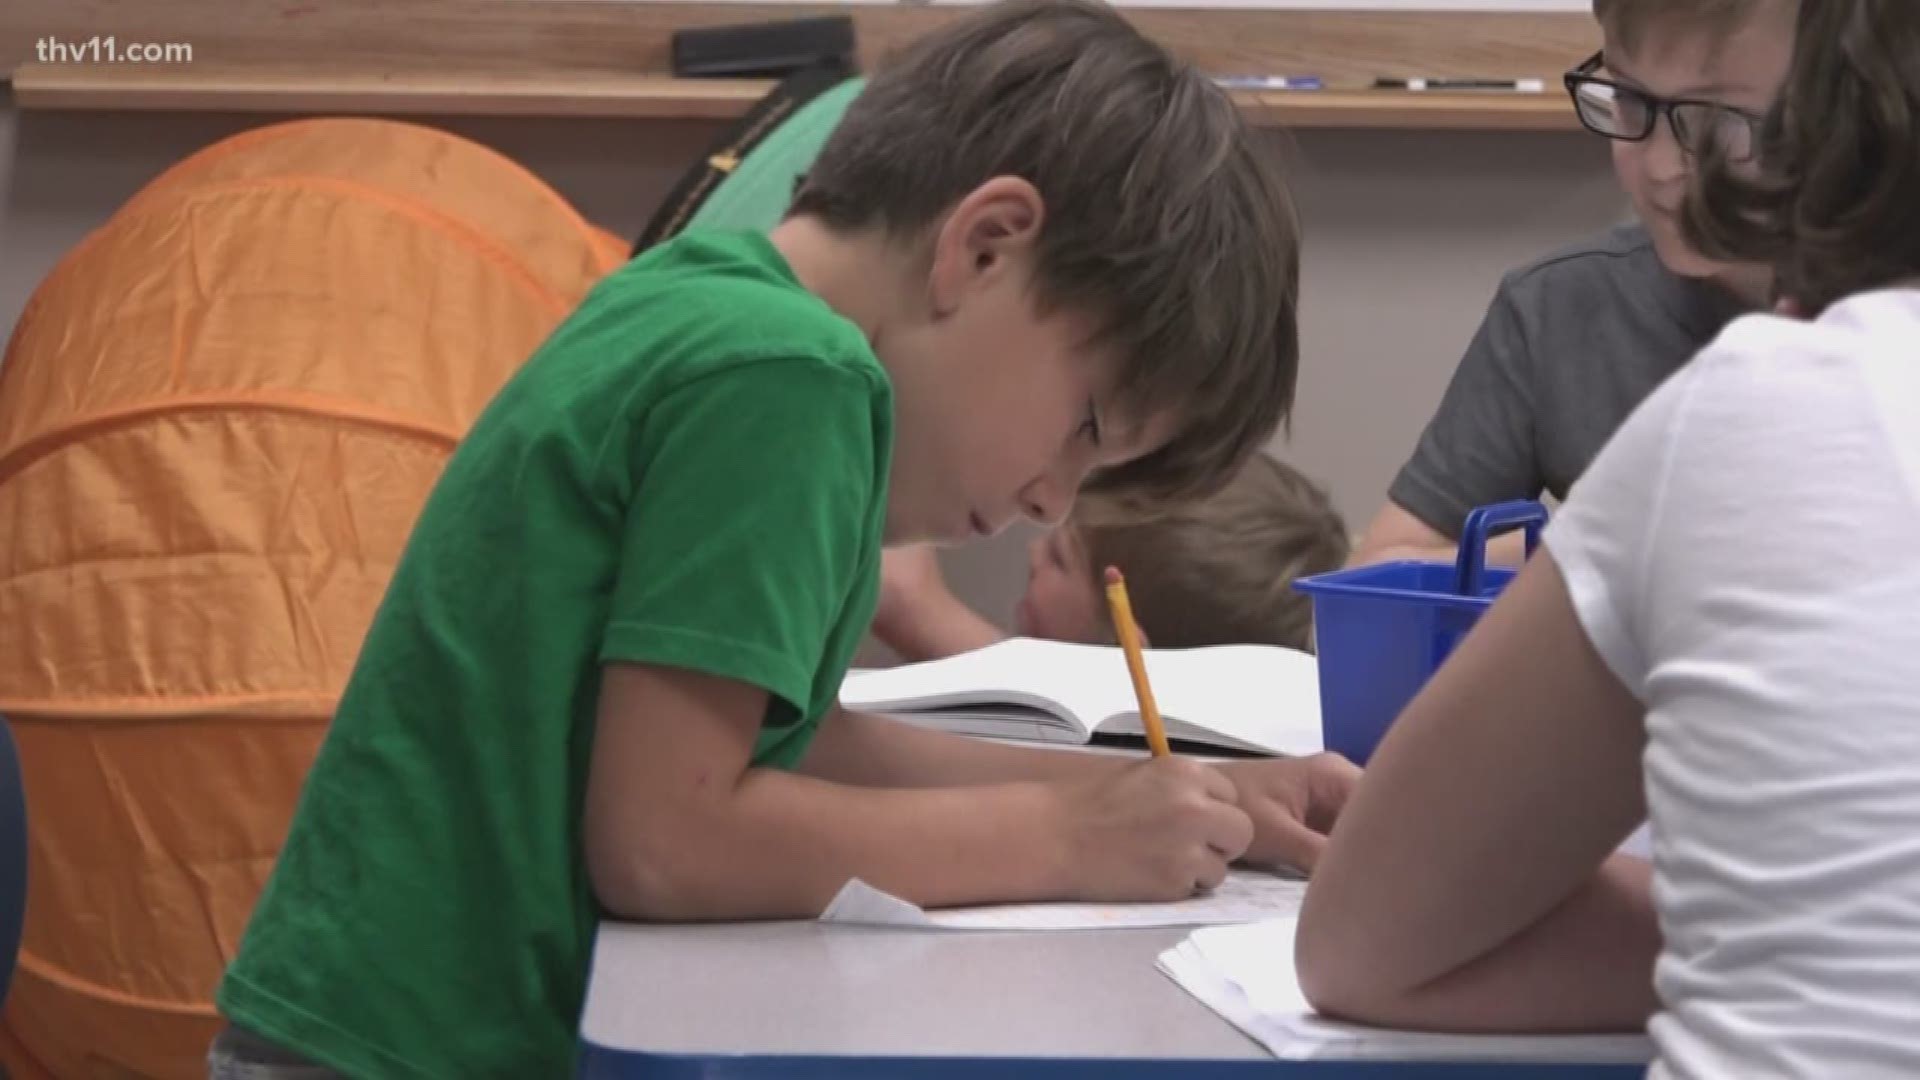 Little Rock school for dyslexic children needs funding for a new place to learn after outgrowing their space.